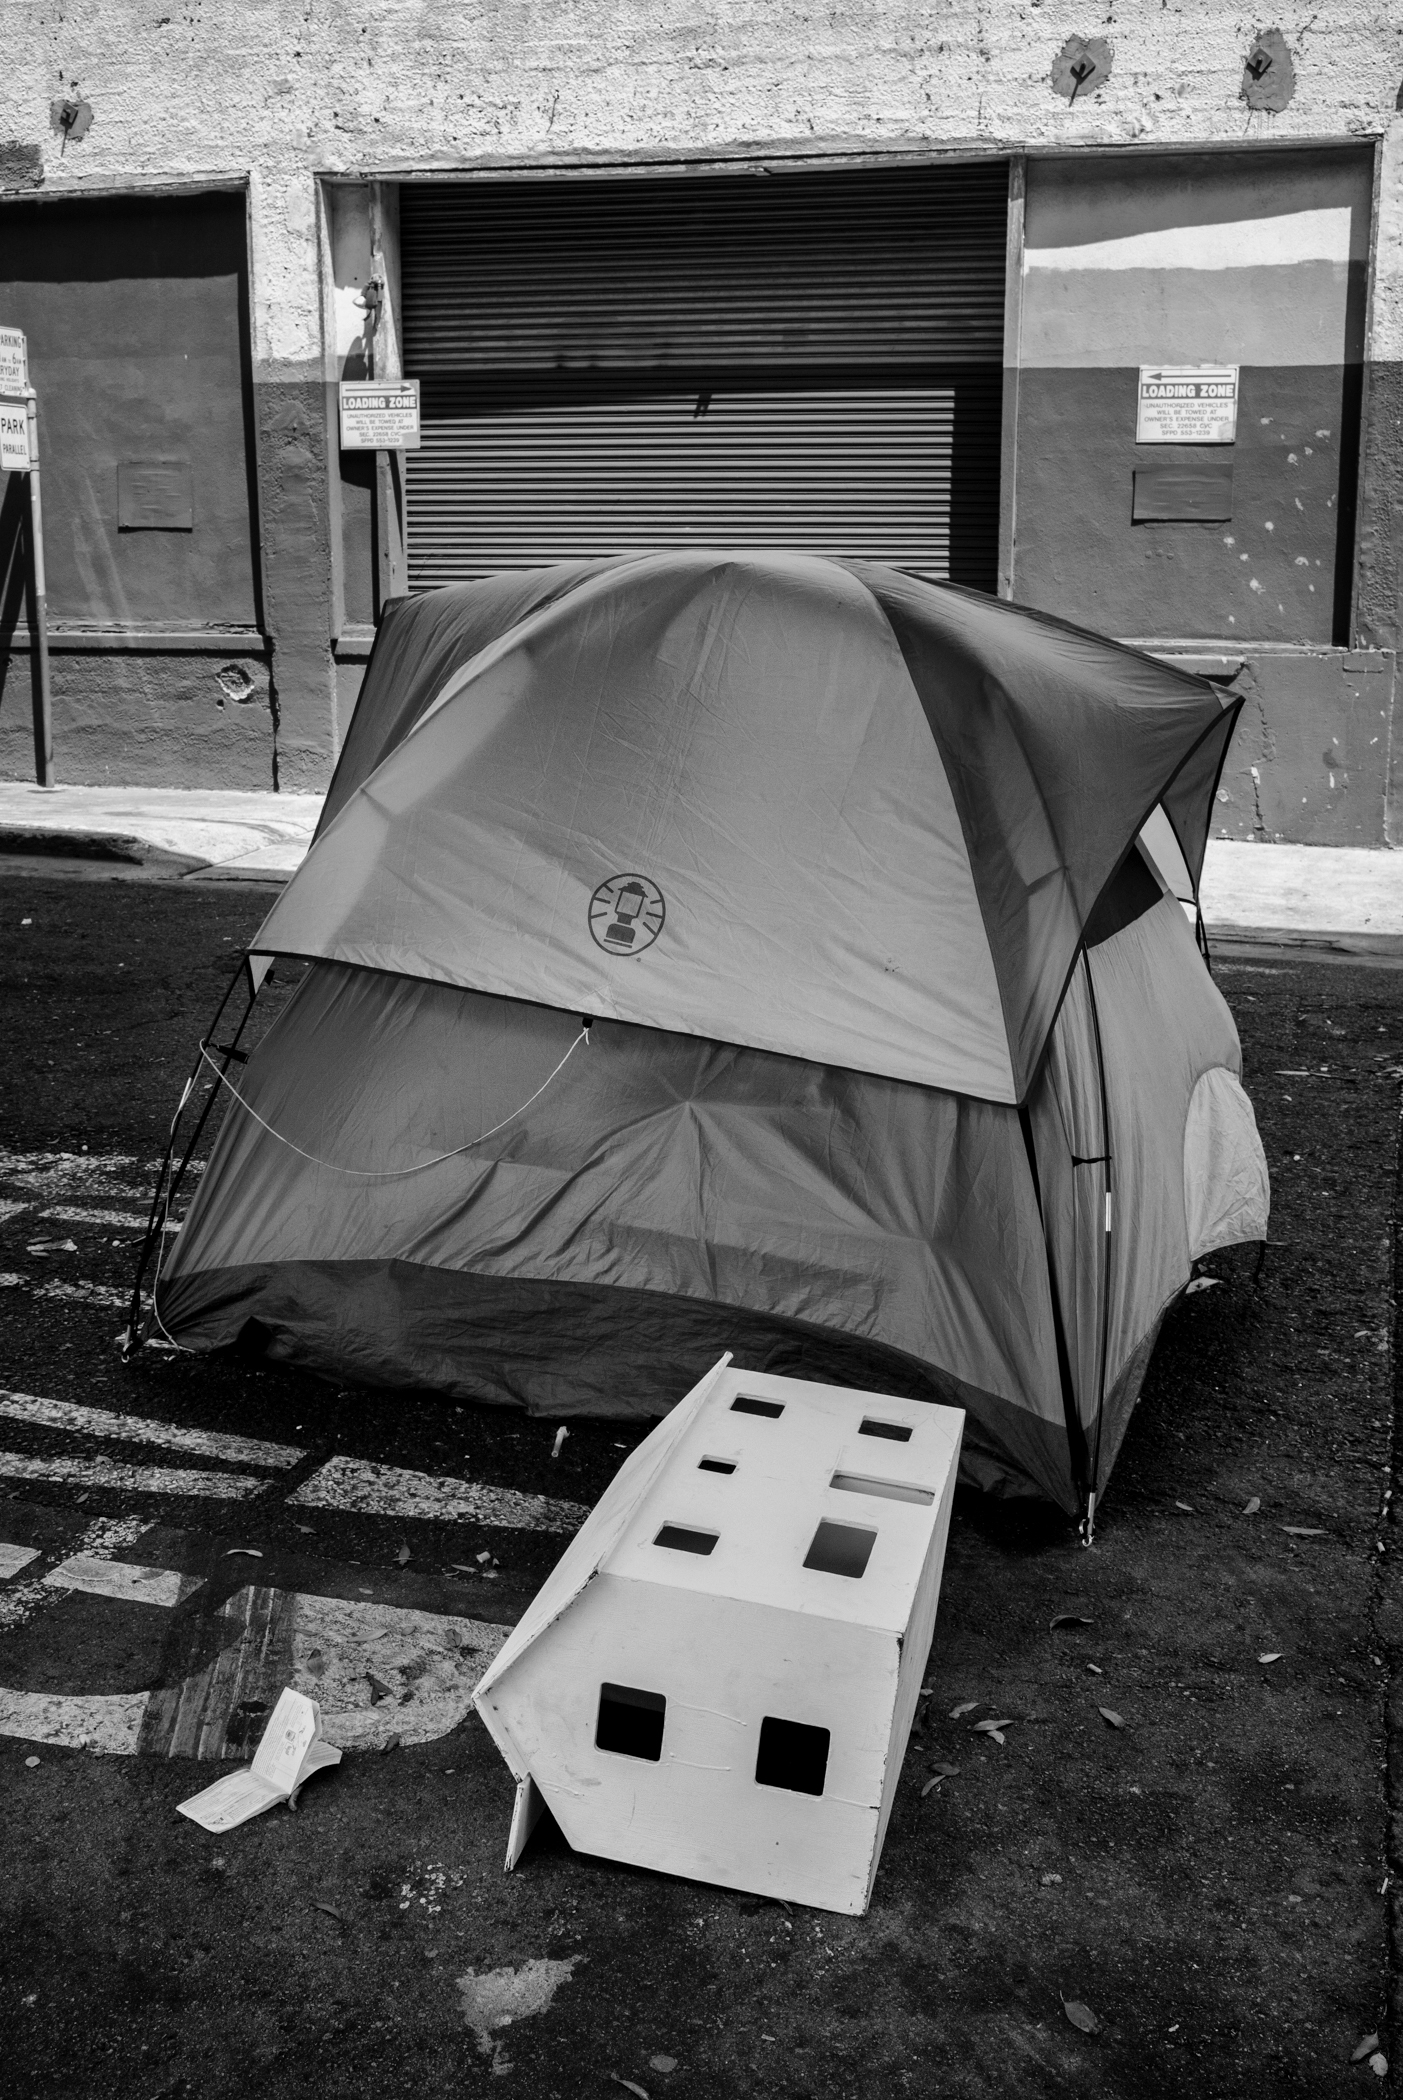 A tent is in the center of the frame. In front of it is what looks like a white dollhouse, laying flat on the ground. The image is in Black and White